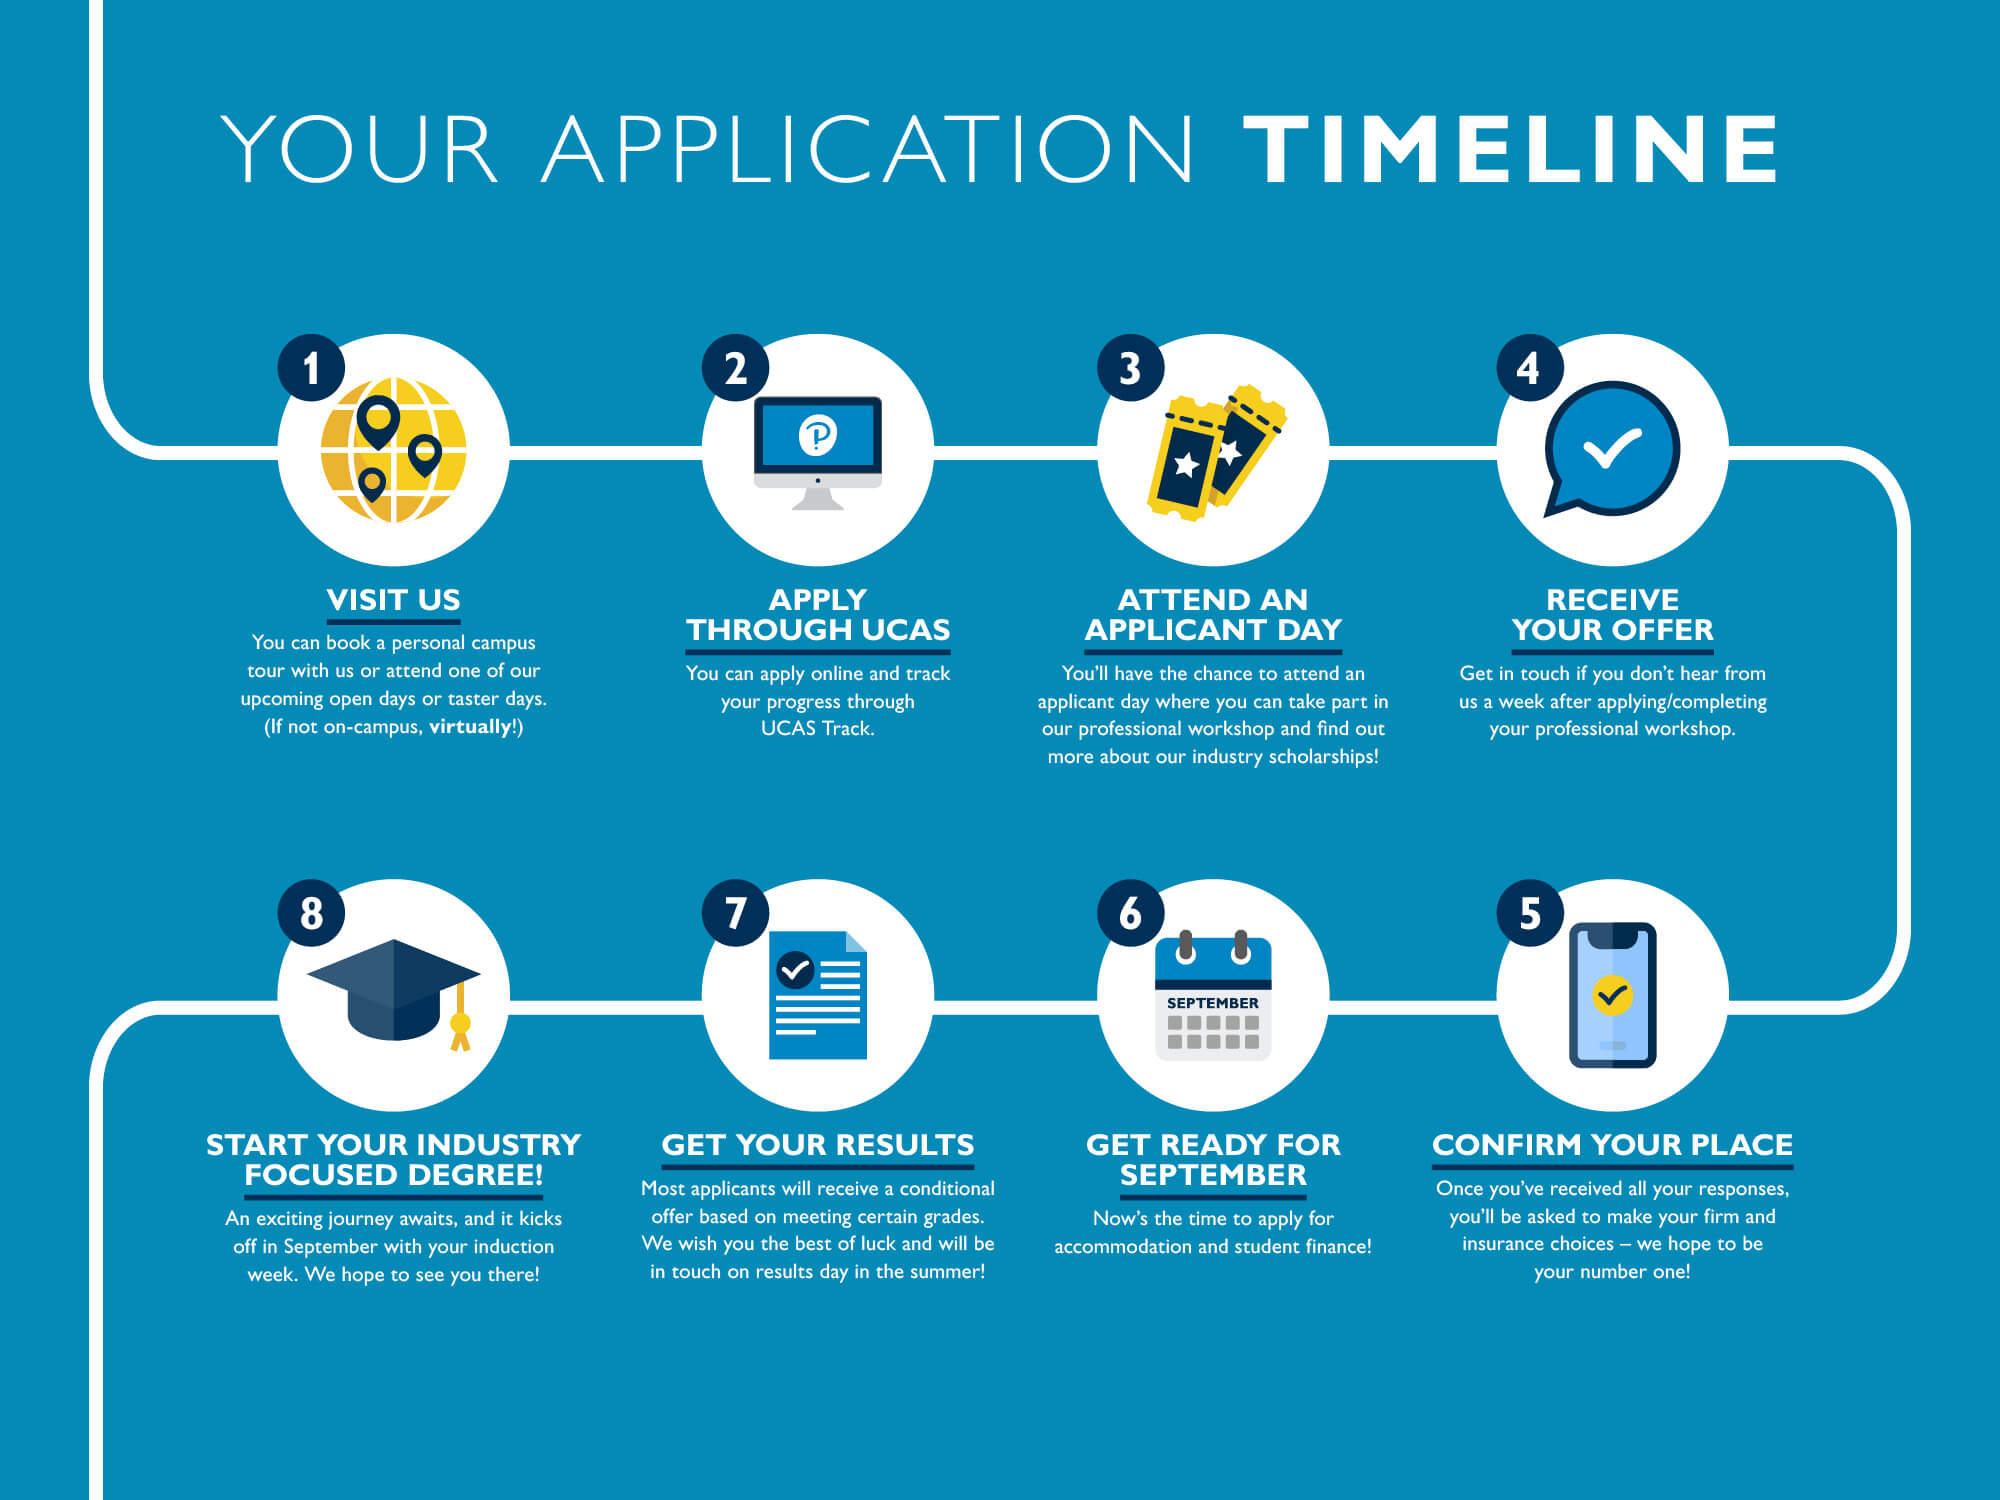 Infographic of the Pearson Business School application timeline